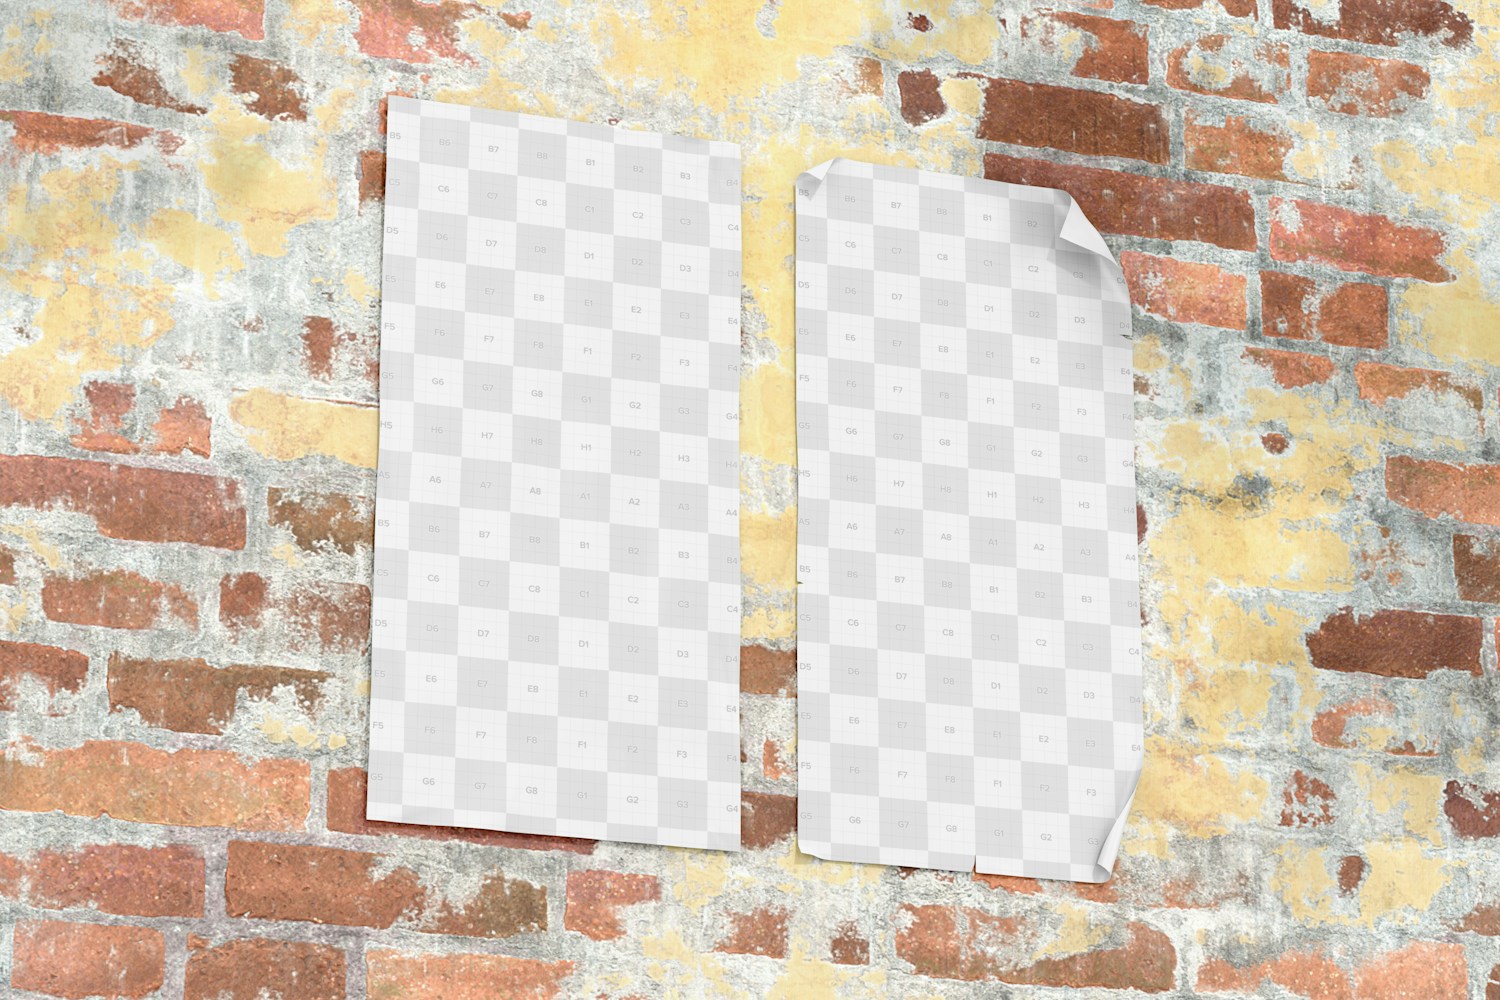 Glued Street Posters Mockup, Low Angle View